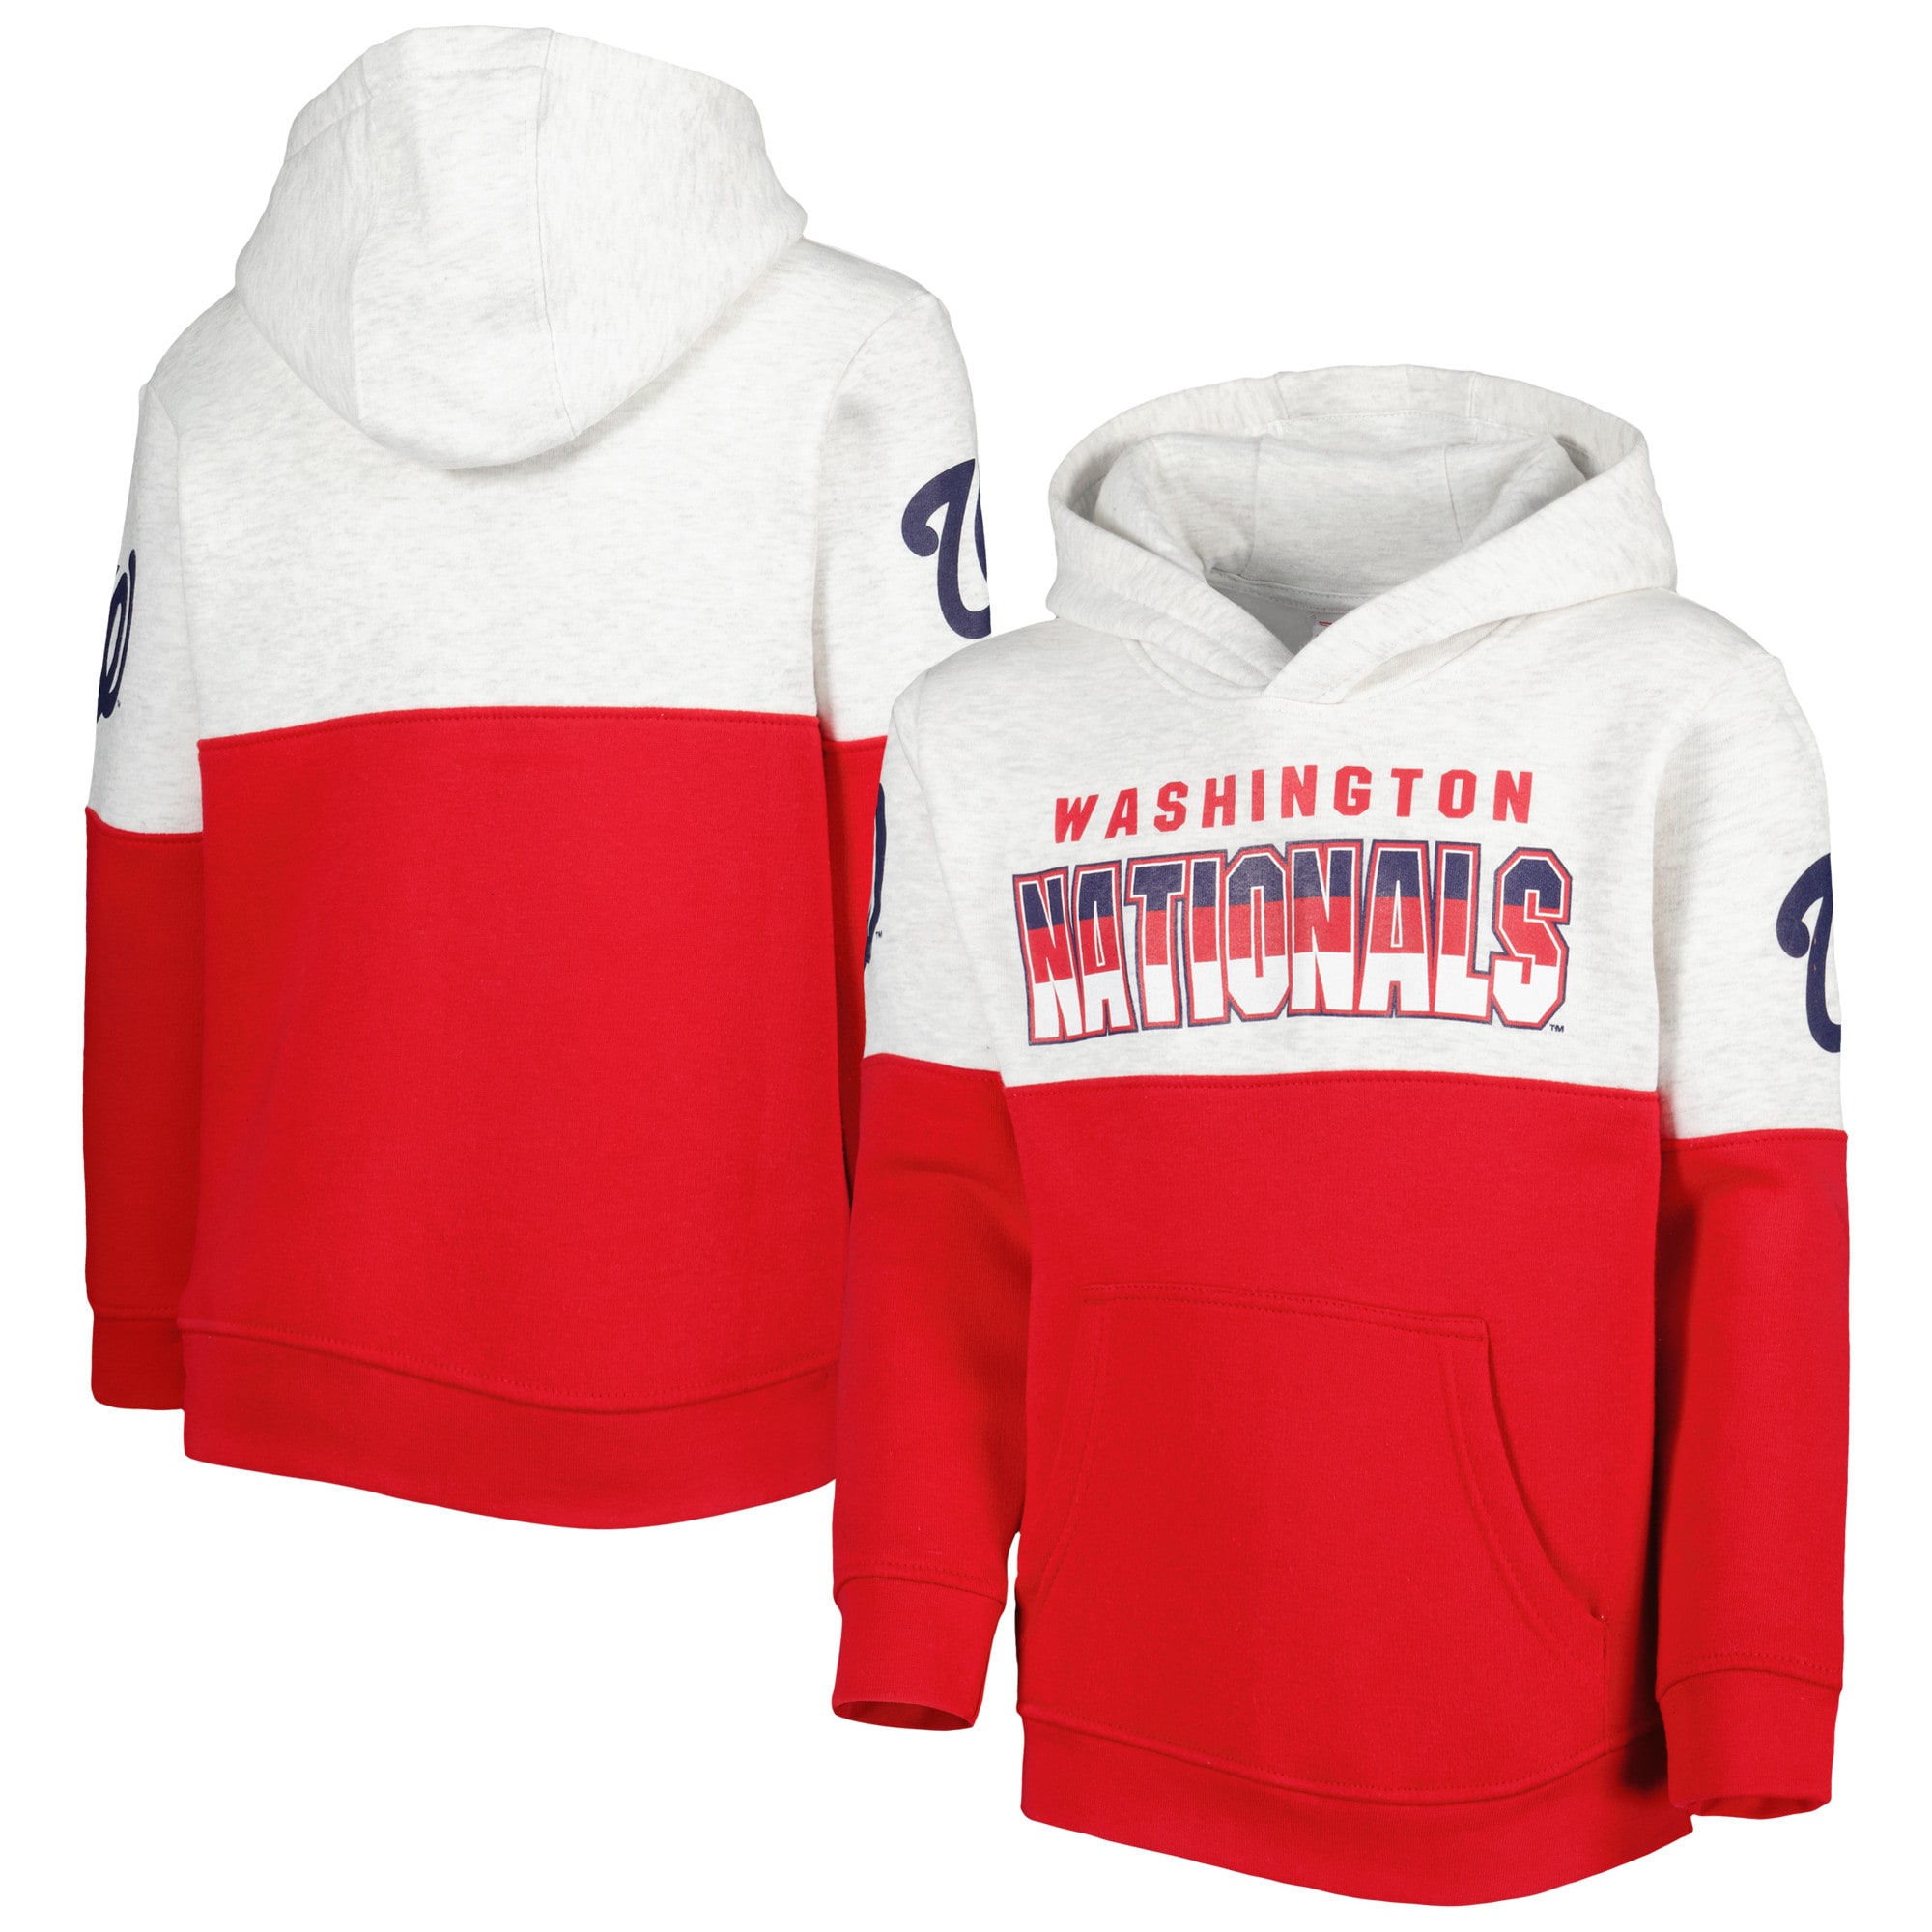 Youth Washington Nationals Heather Gray/Red Playmaker Pullover Hoodie